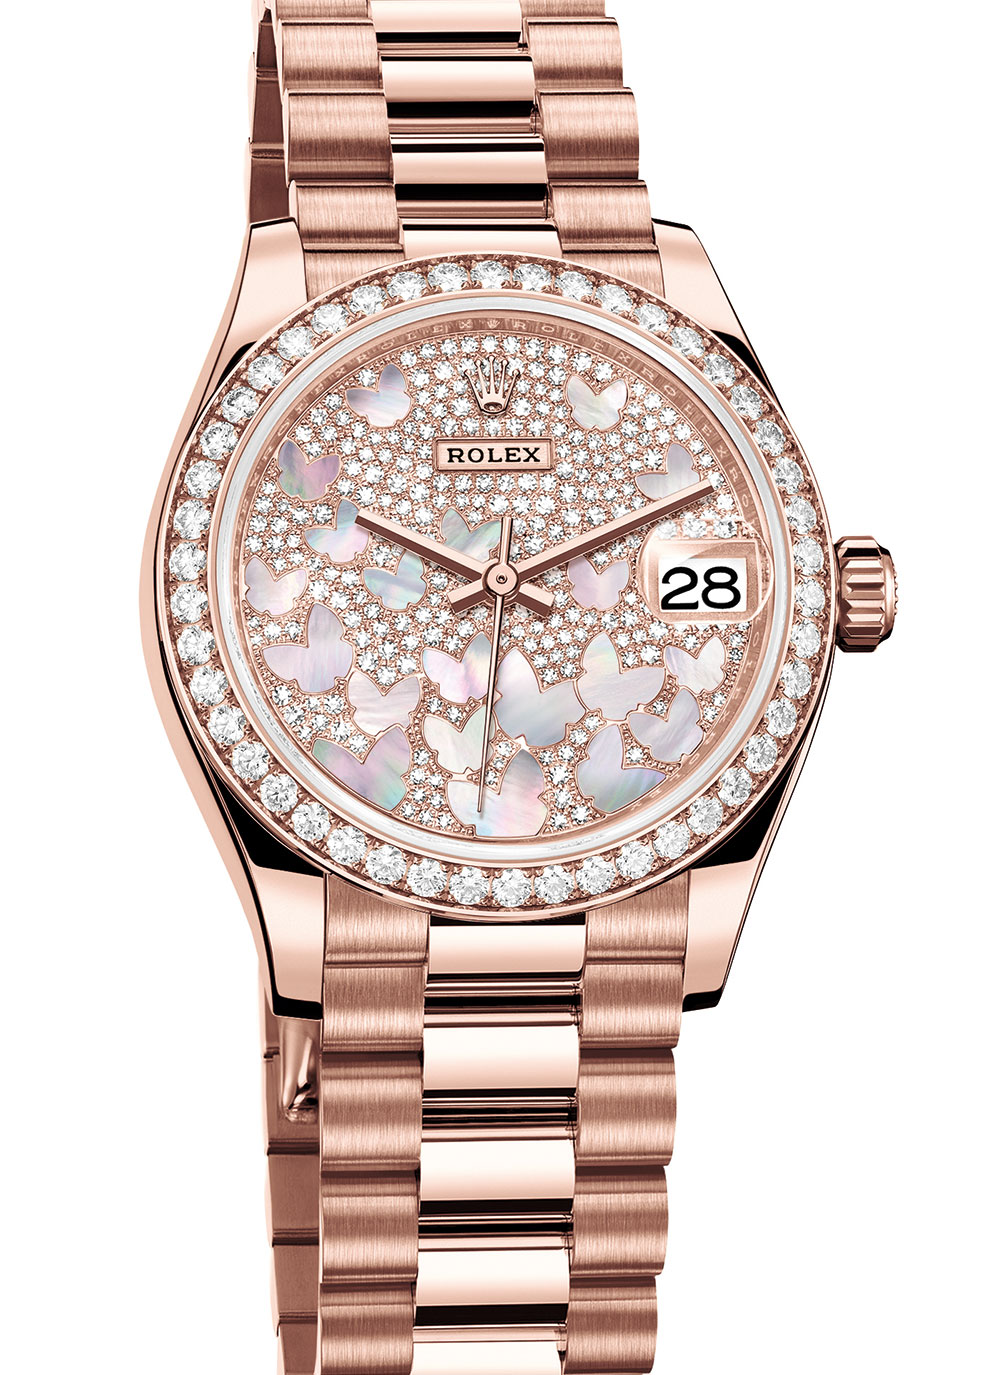 Top Ten Ladies' Watches From Baselworld 2018 | aBlogtoWatch